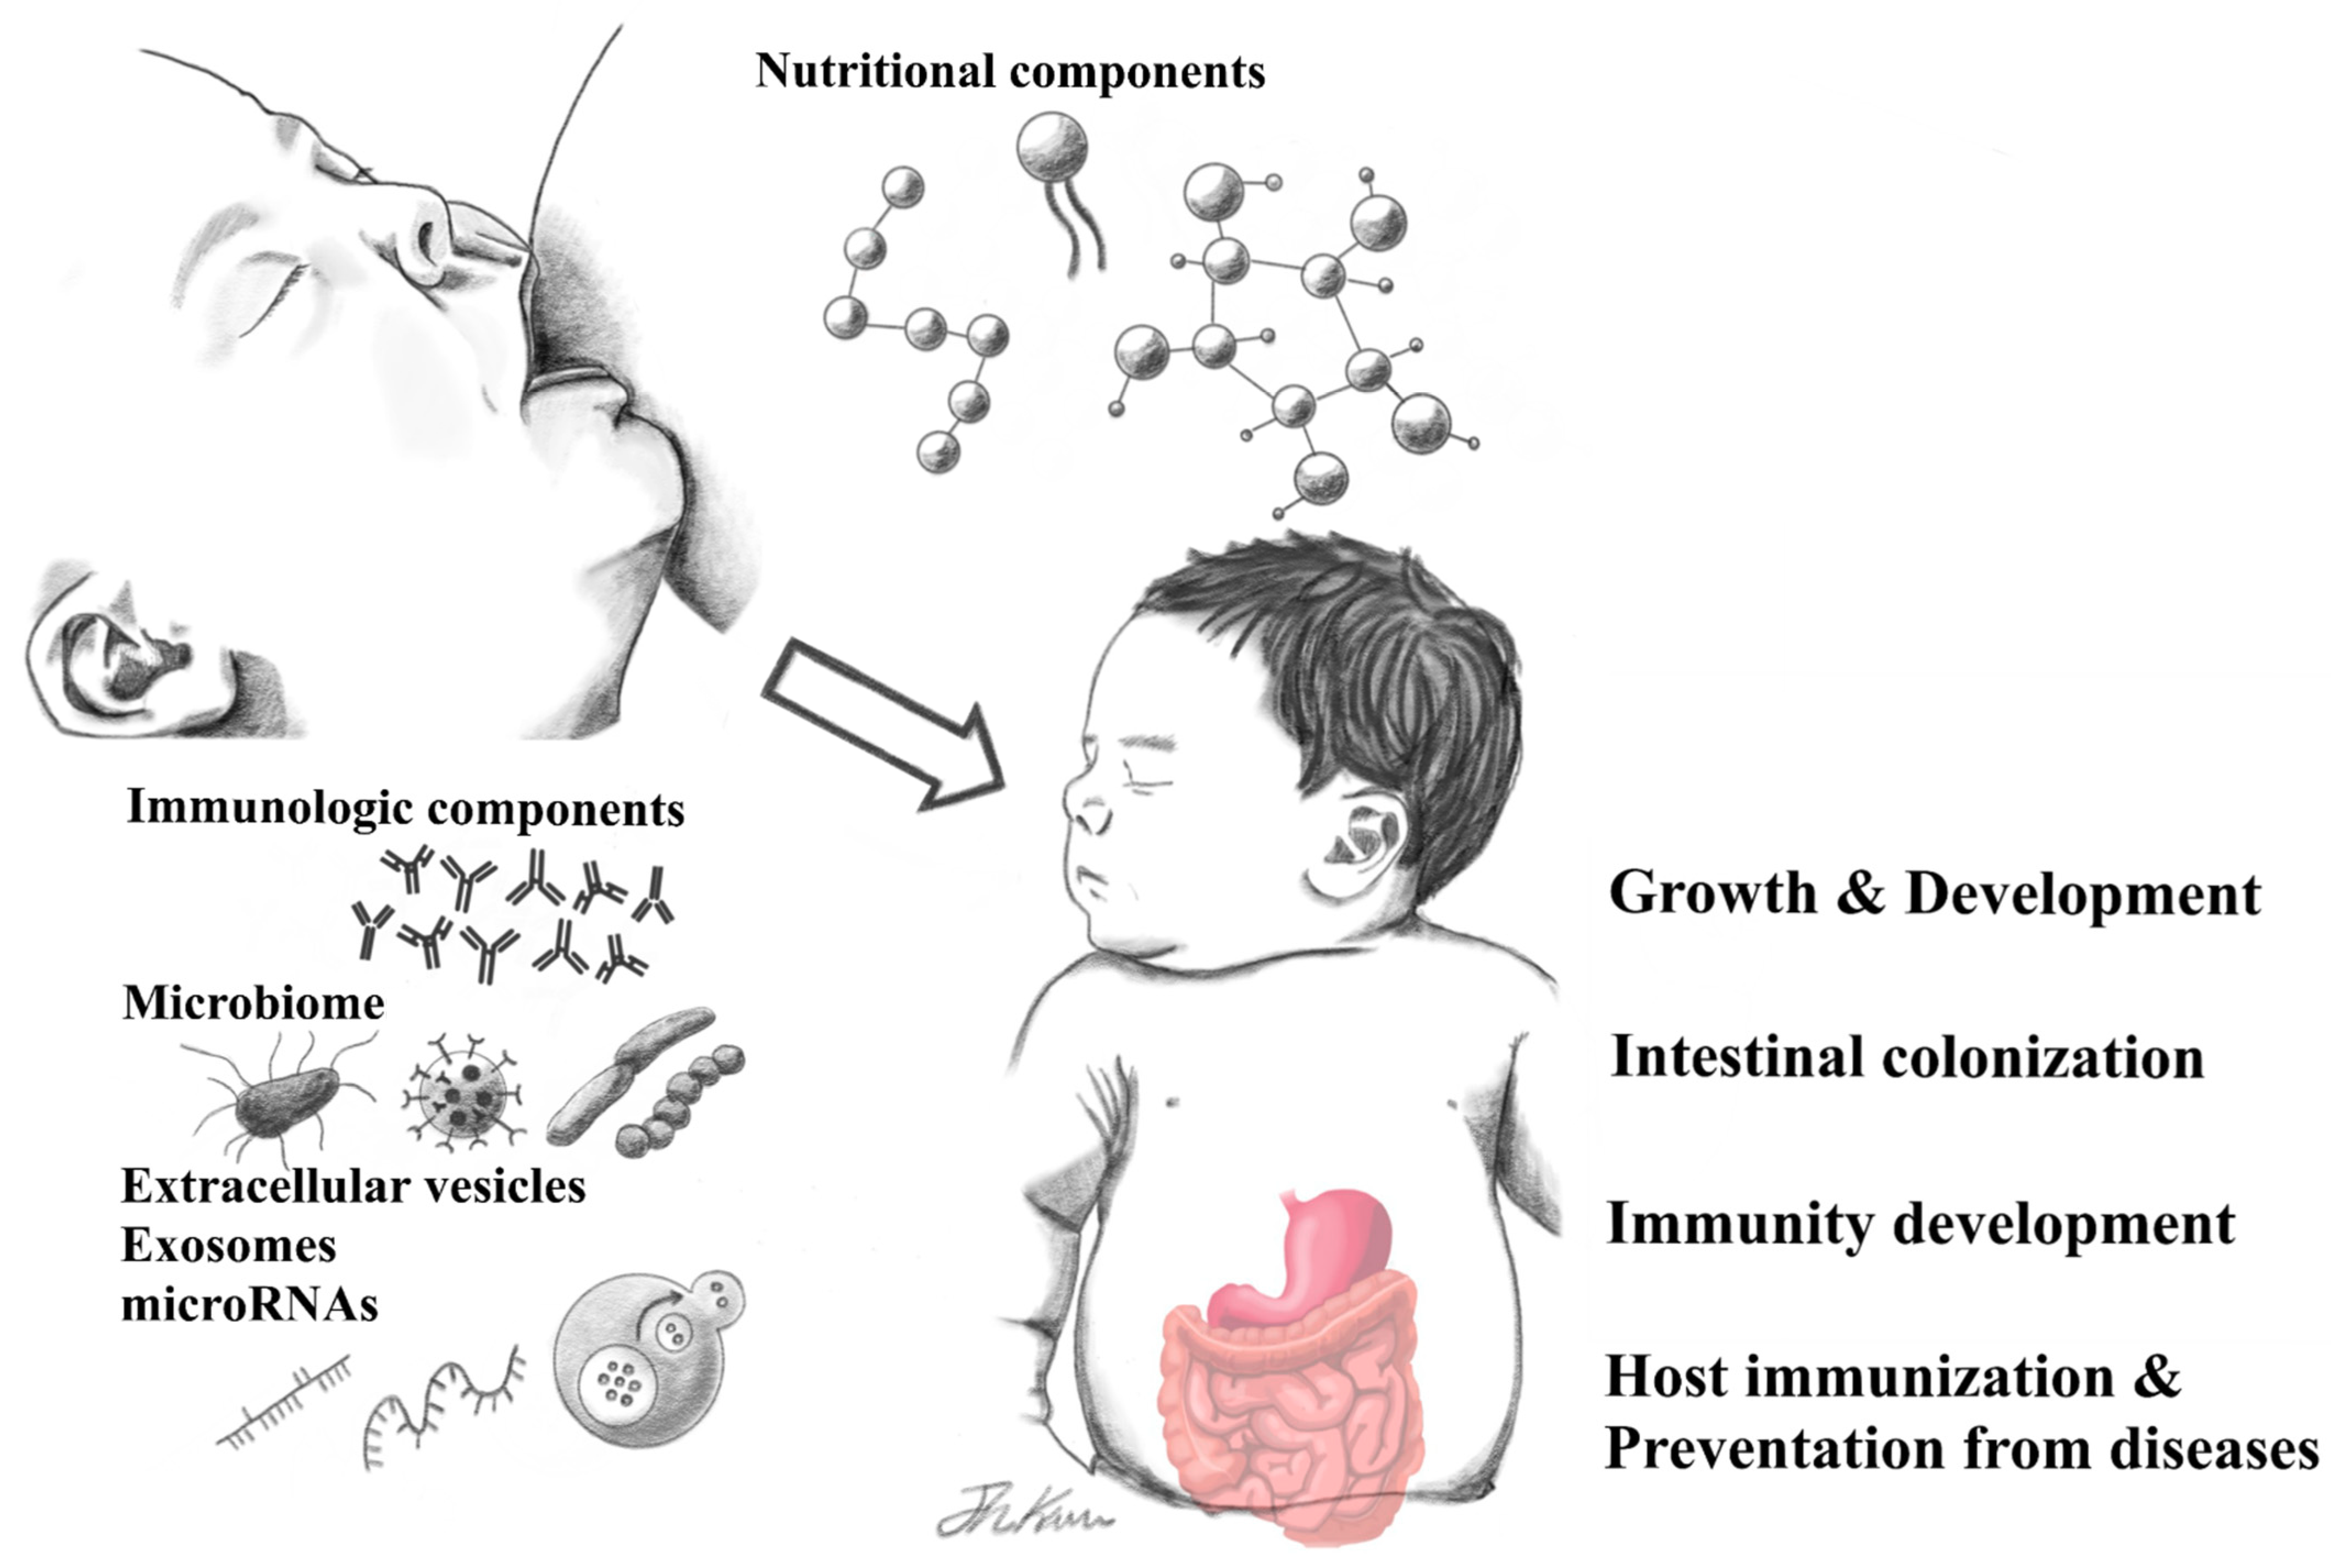 Nutrients Free Full-Text Human Breast Milk Composition and Function in Human Health From Nutritional Components to Microbiome and MicroRNAs pic